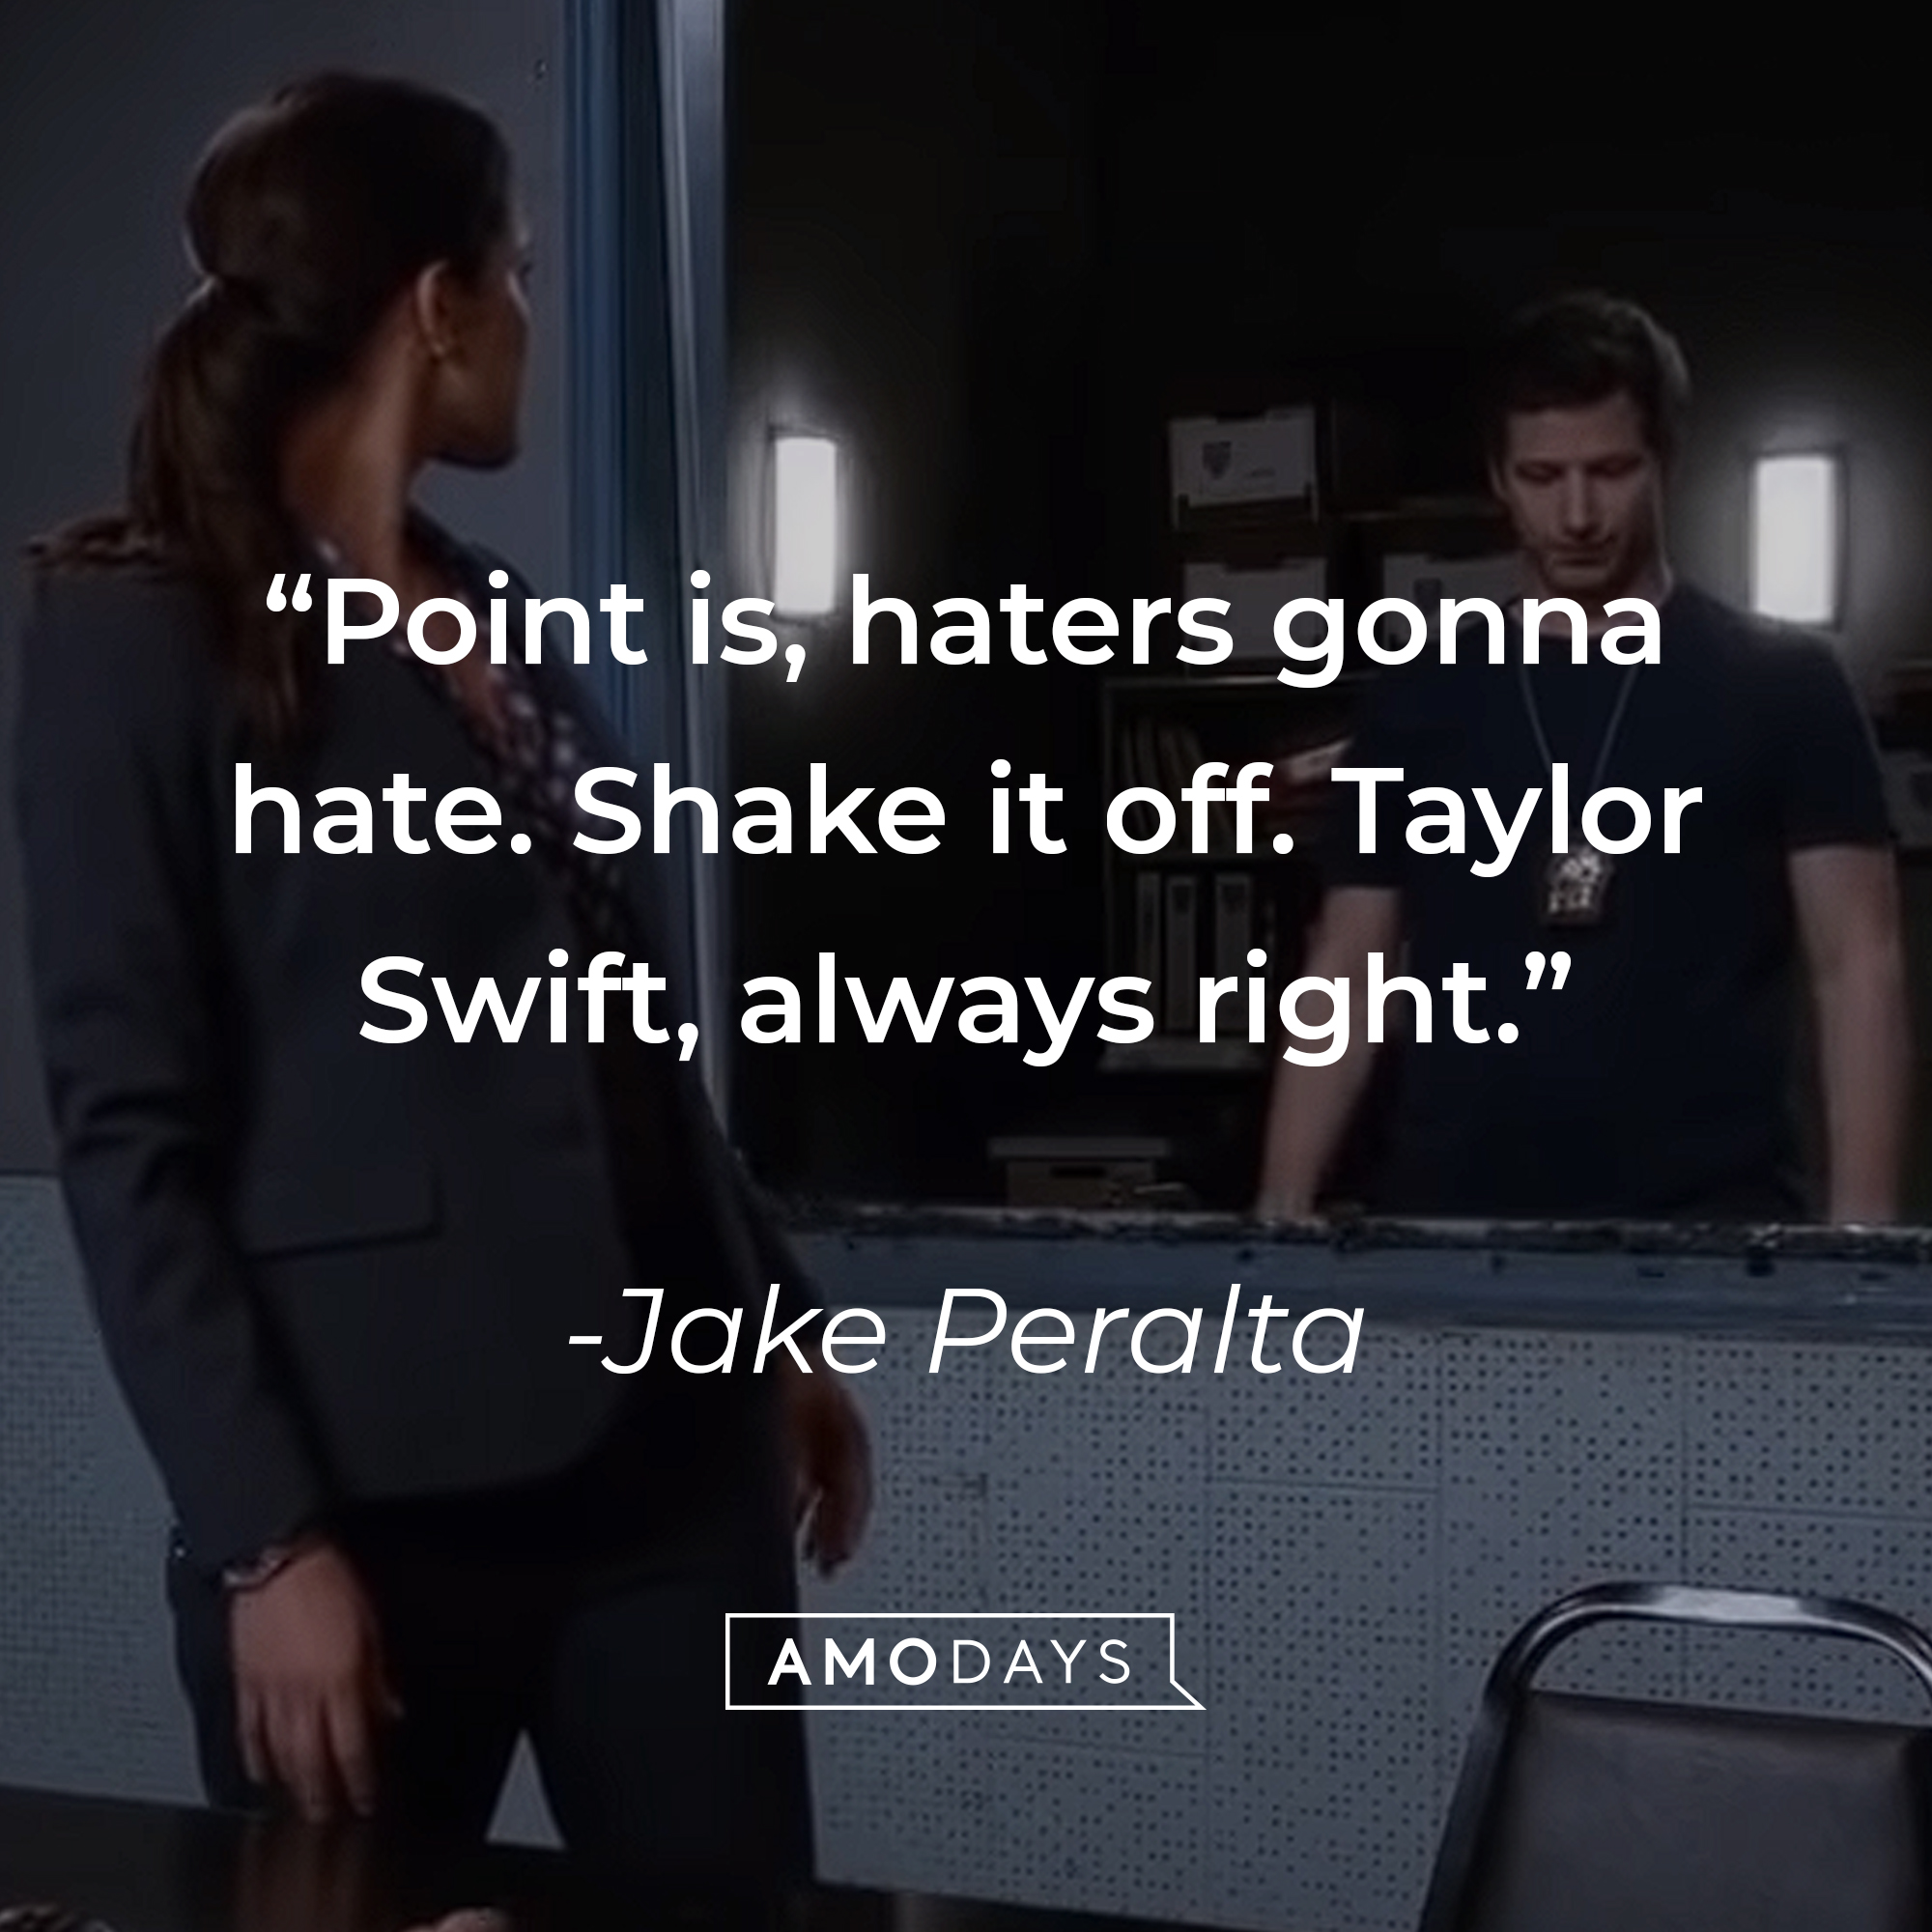 A picture of Amy Santiago and Jake Peralta with his quote: “Point is, haters gonna hate. Shake it off. Taylor Swift, always right.” |Source: youtube.com/NBCBrooklyn99